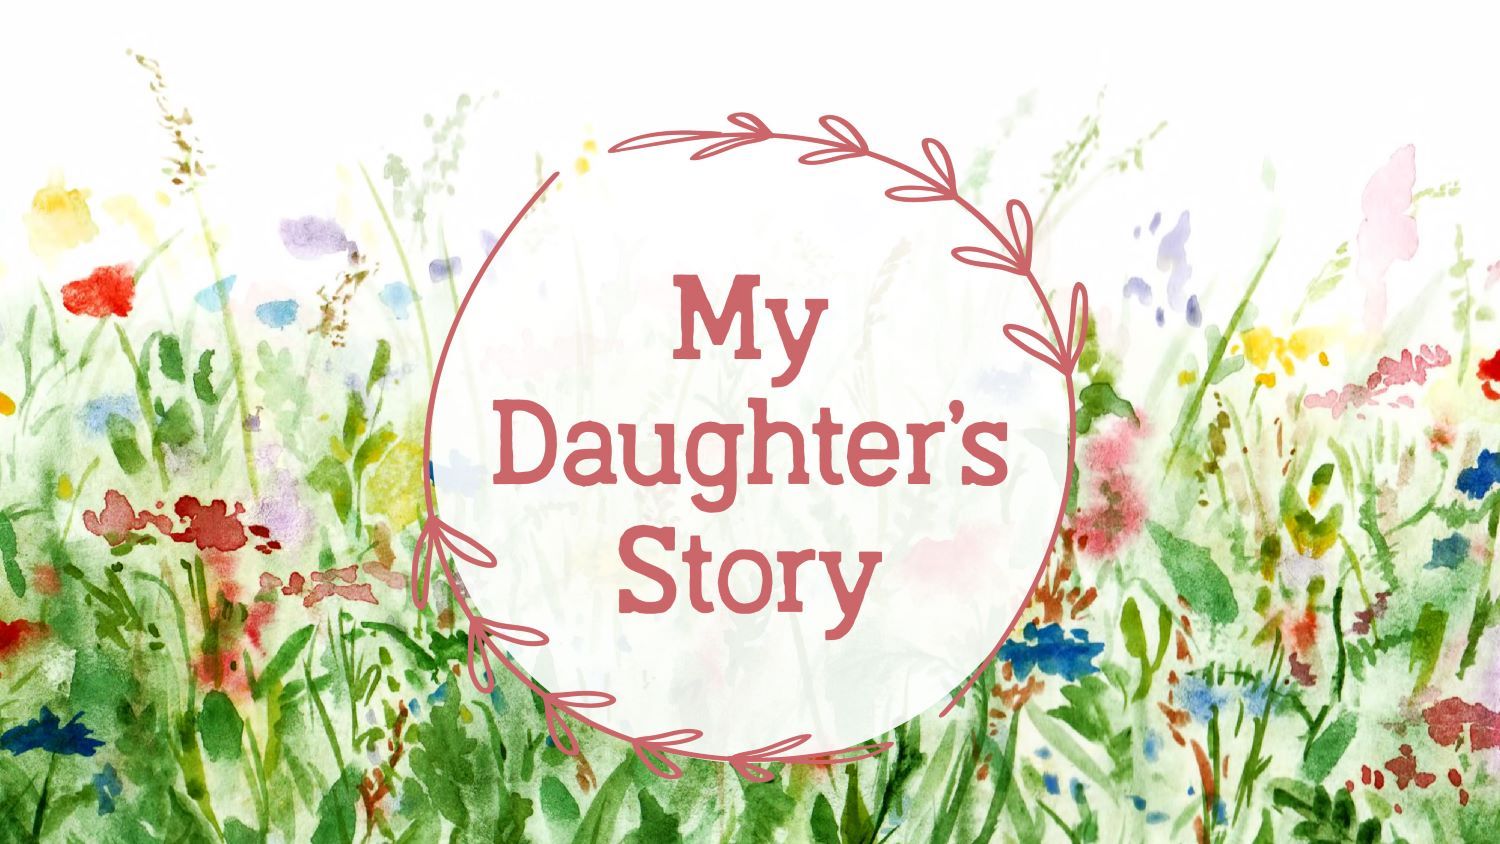 My Daughter’s Story